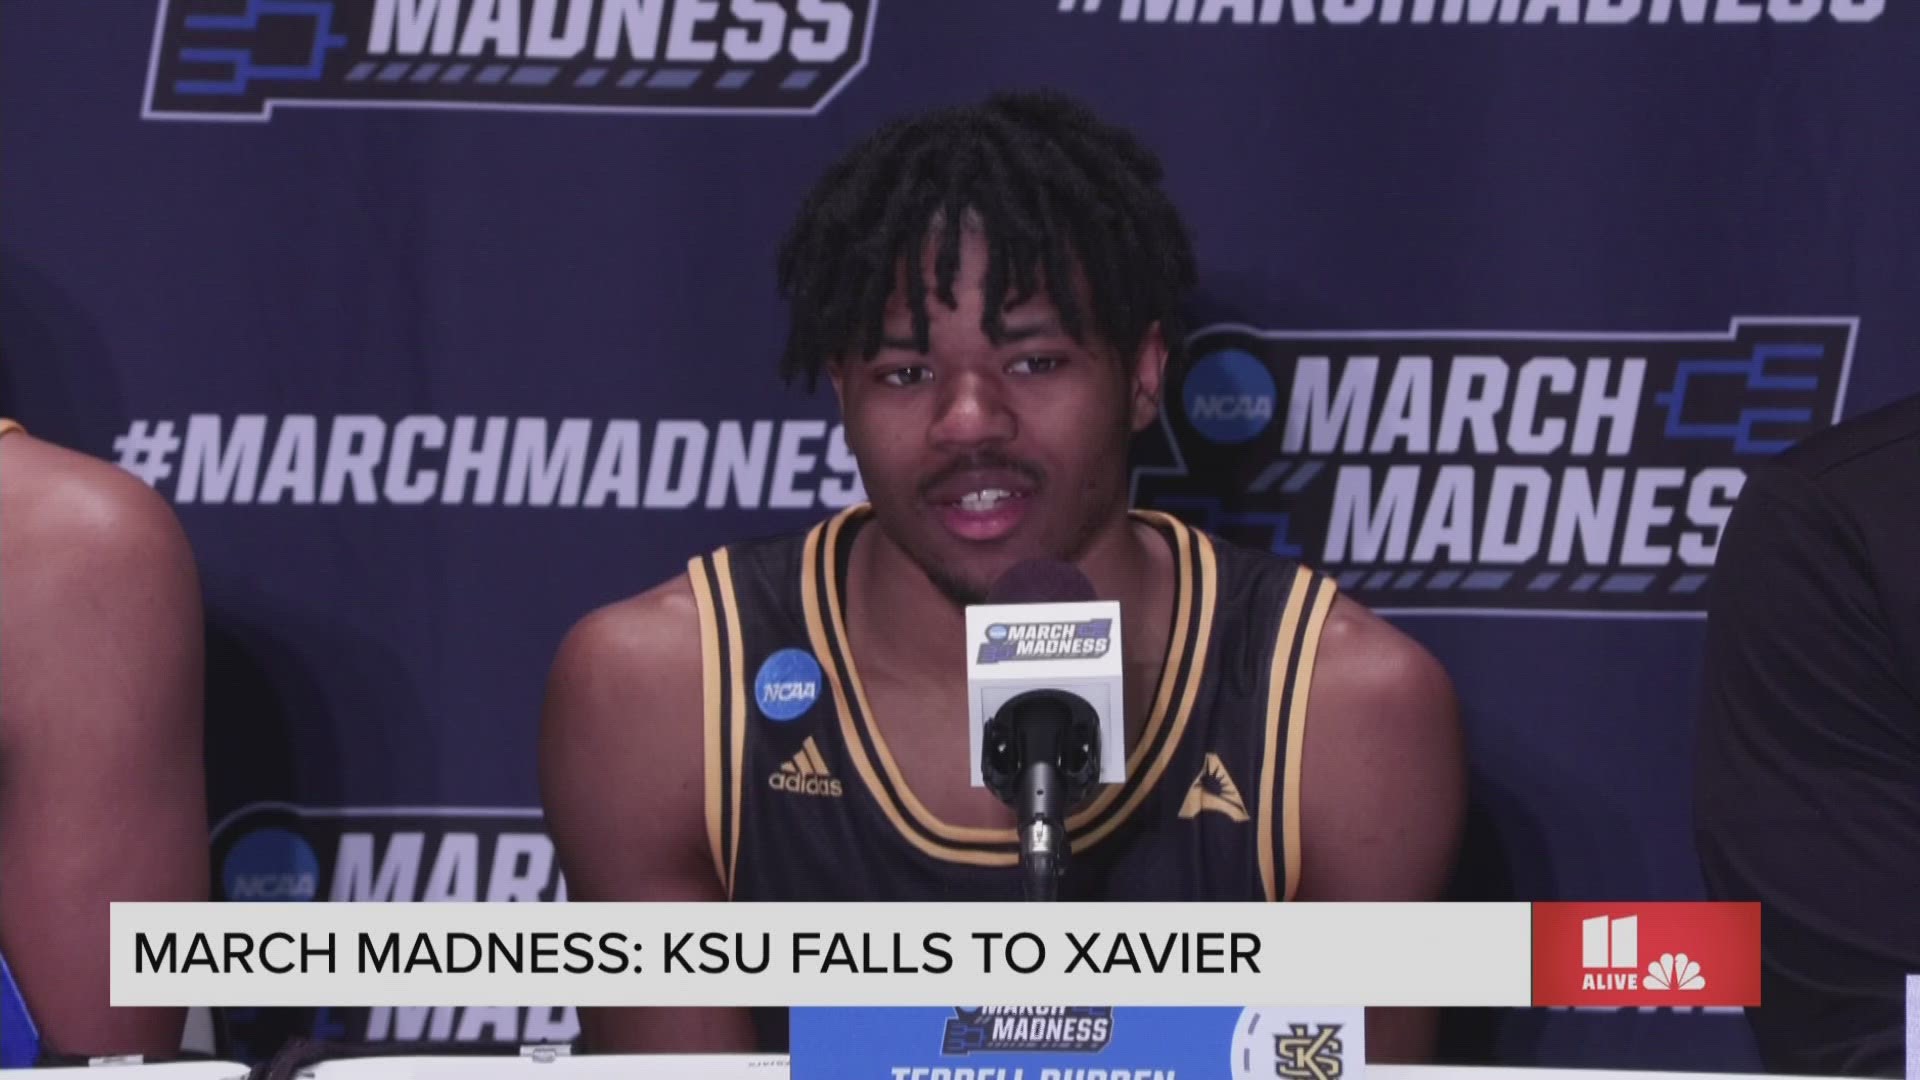 The KSU Owls fell to Xavier University 72-67 in the first round of the NCAA tournament. The team's coach promised it wouldn't be their last time.